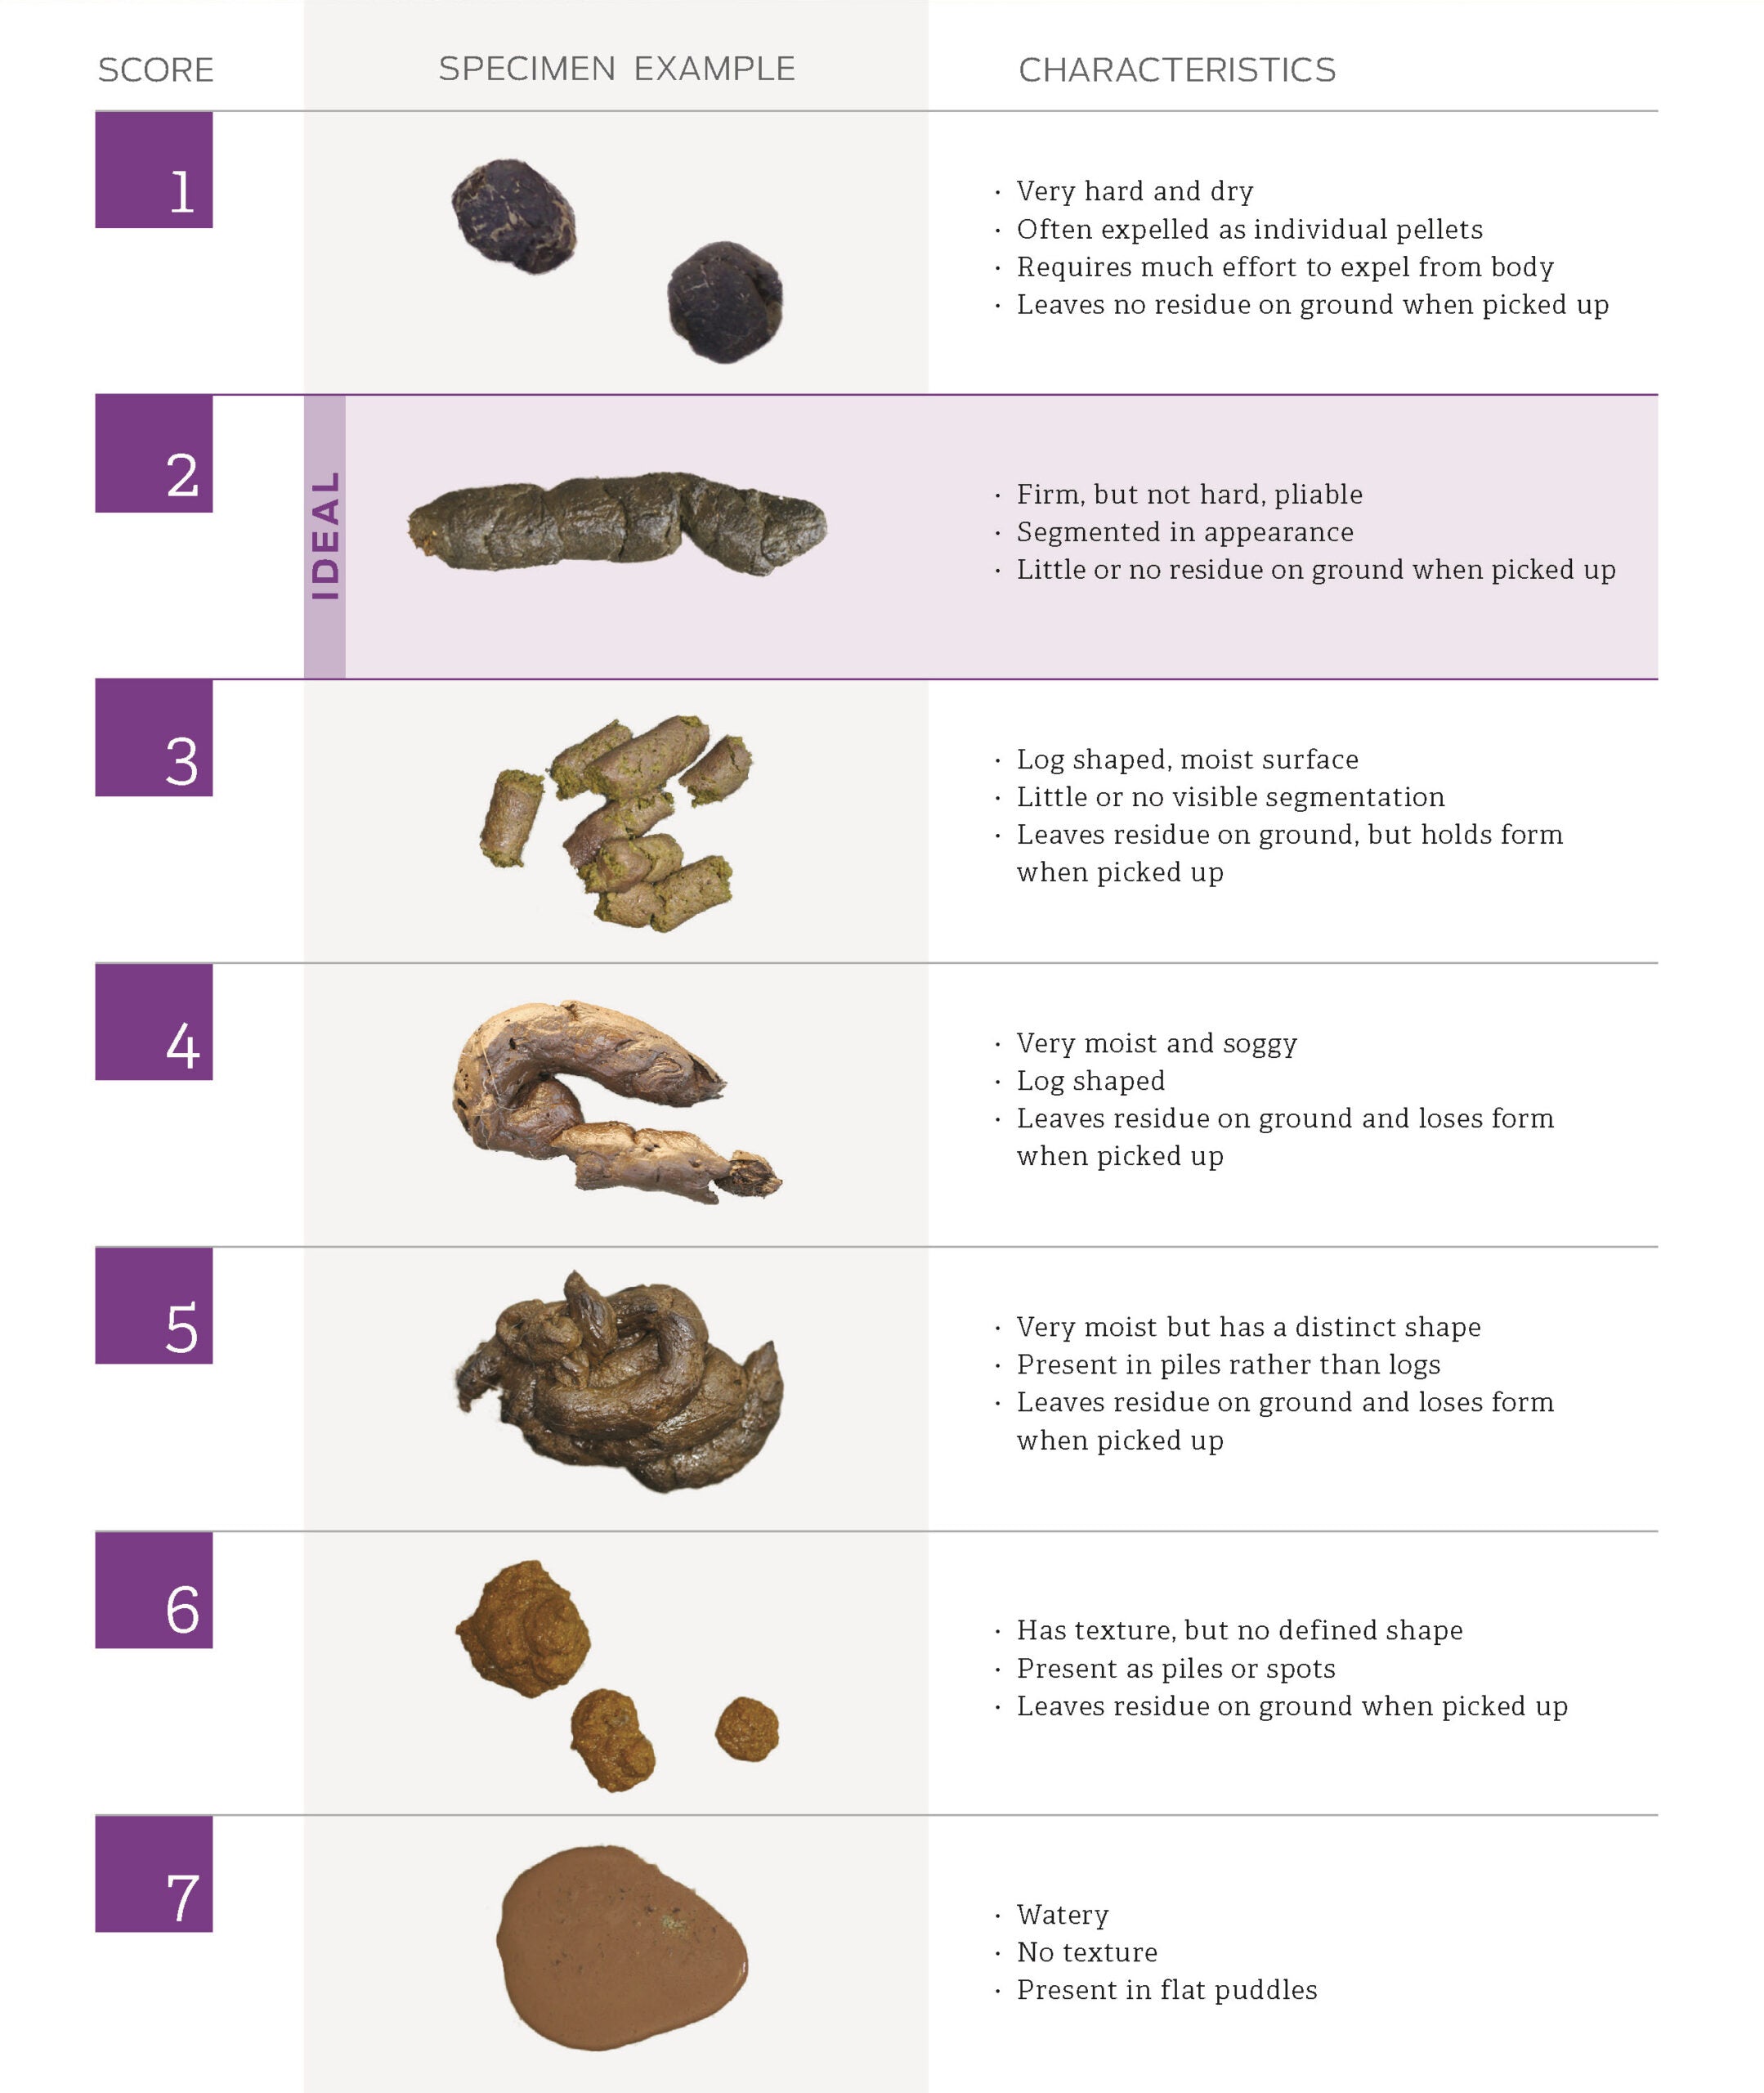 Fecal Scoring Guide from Purina ProPlan Veterinary Diets